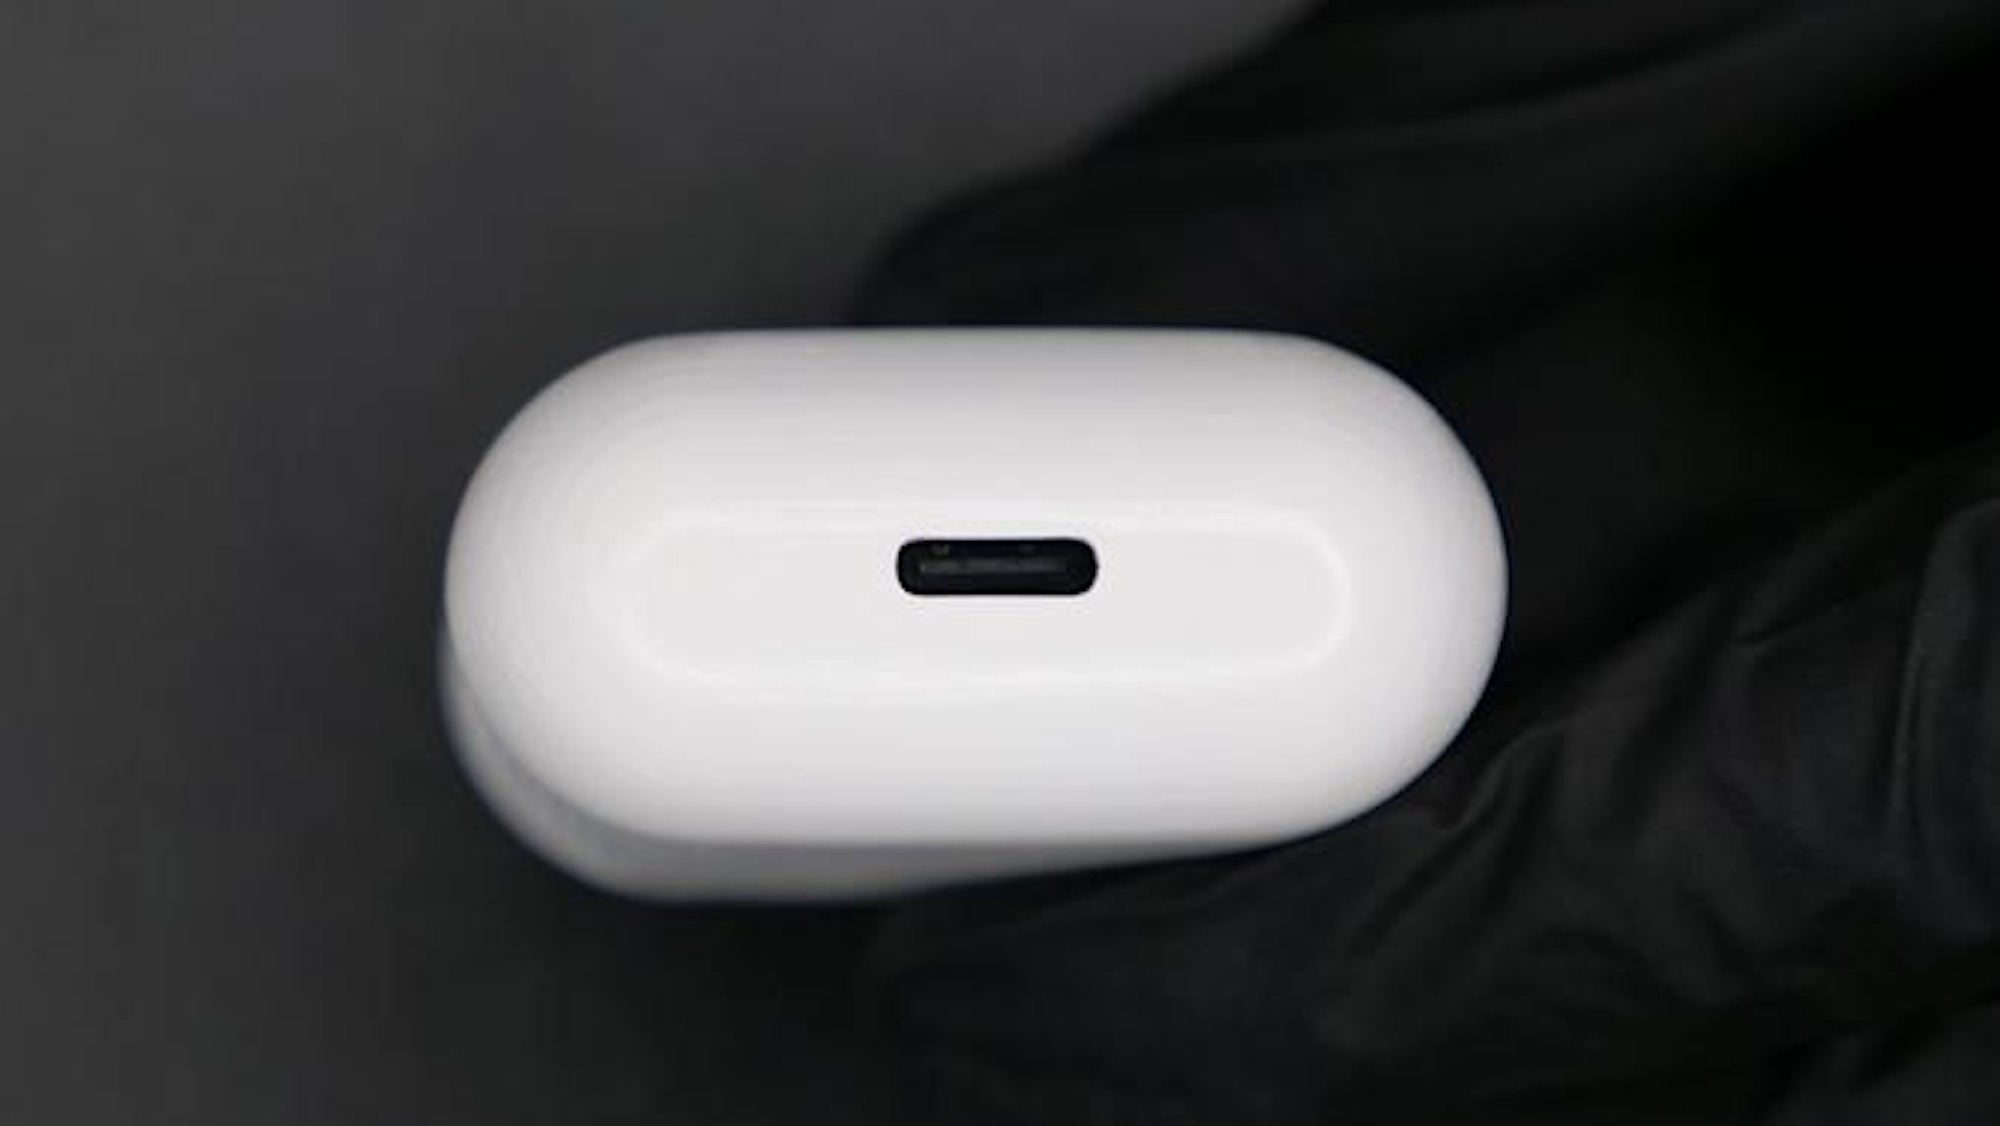 The world's first AirPods with USB-C charging are here - 9to5Mac